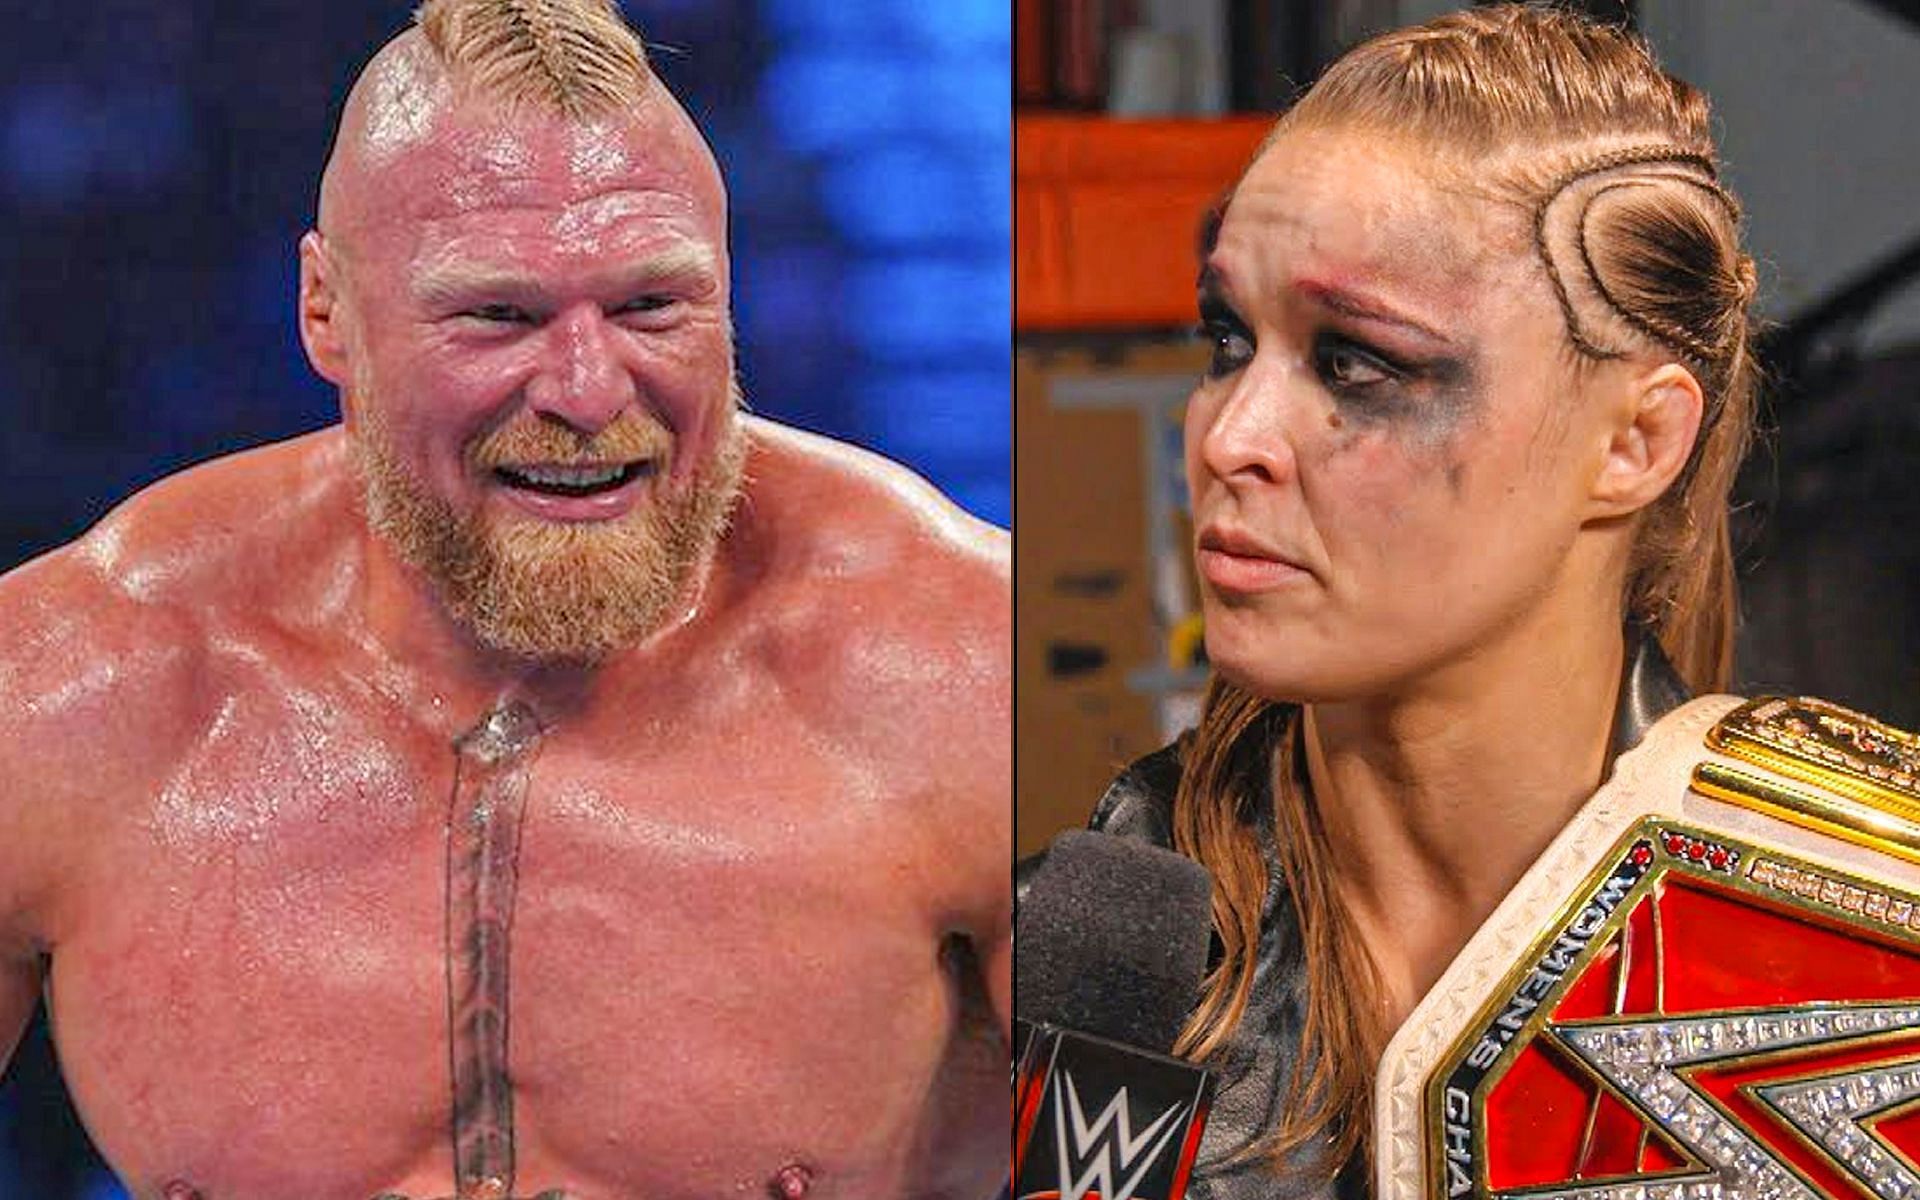 Ronda Rousey and Brock Lesnar both are former UFC stars